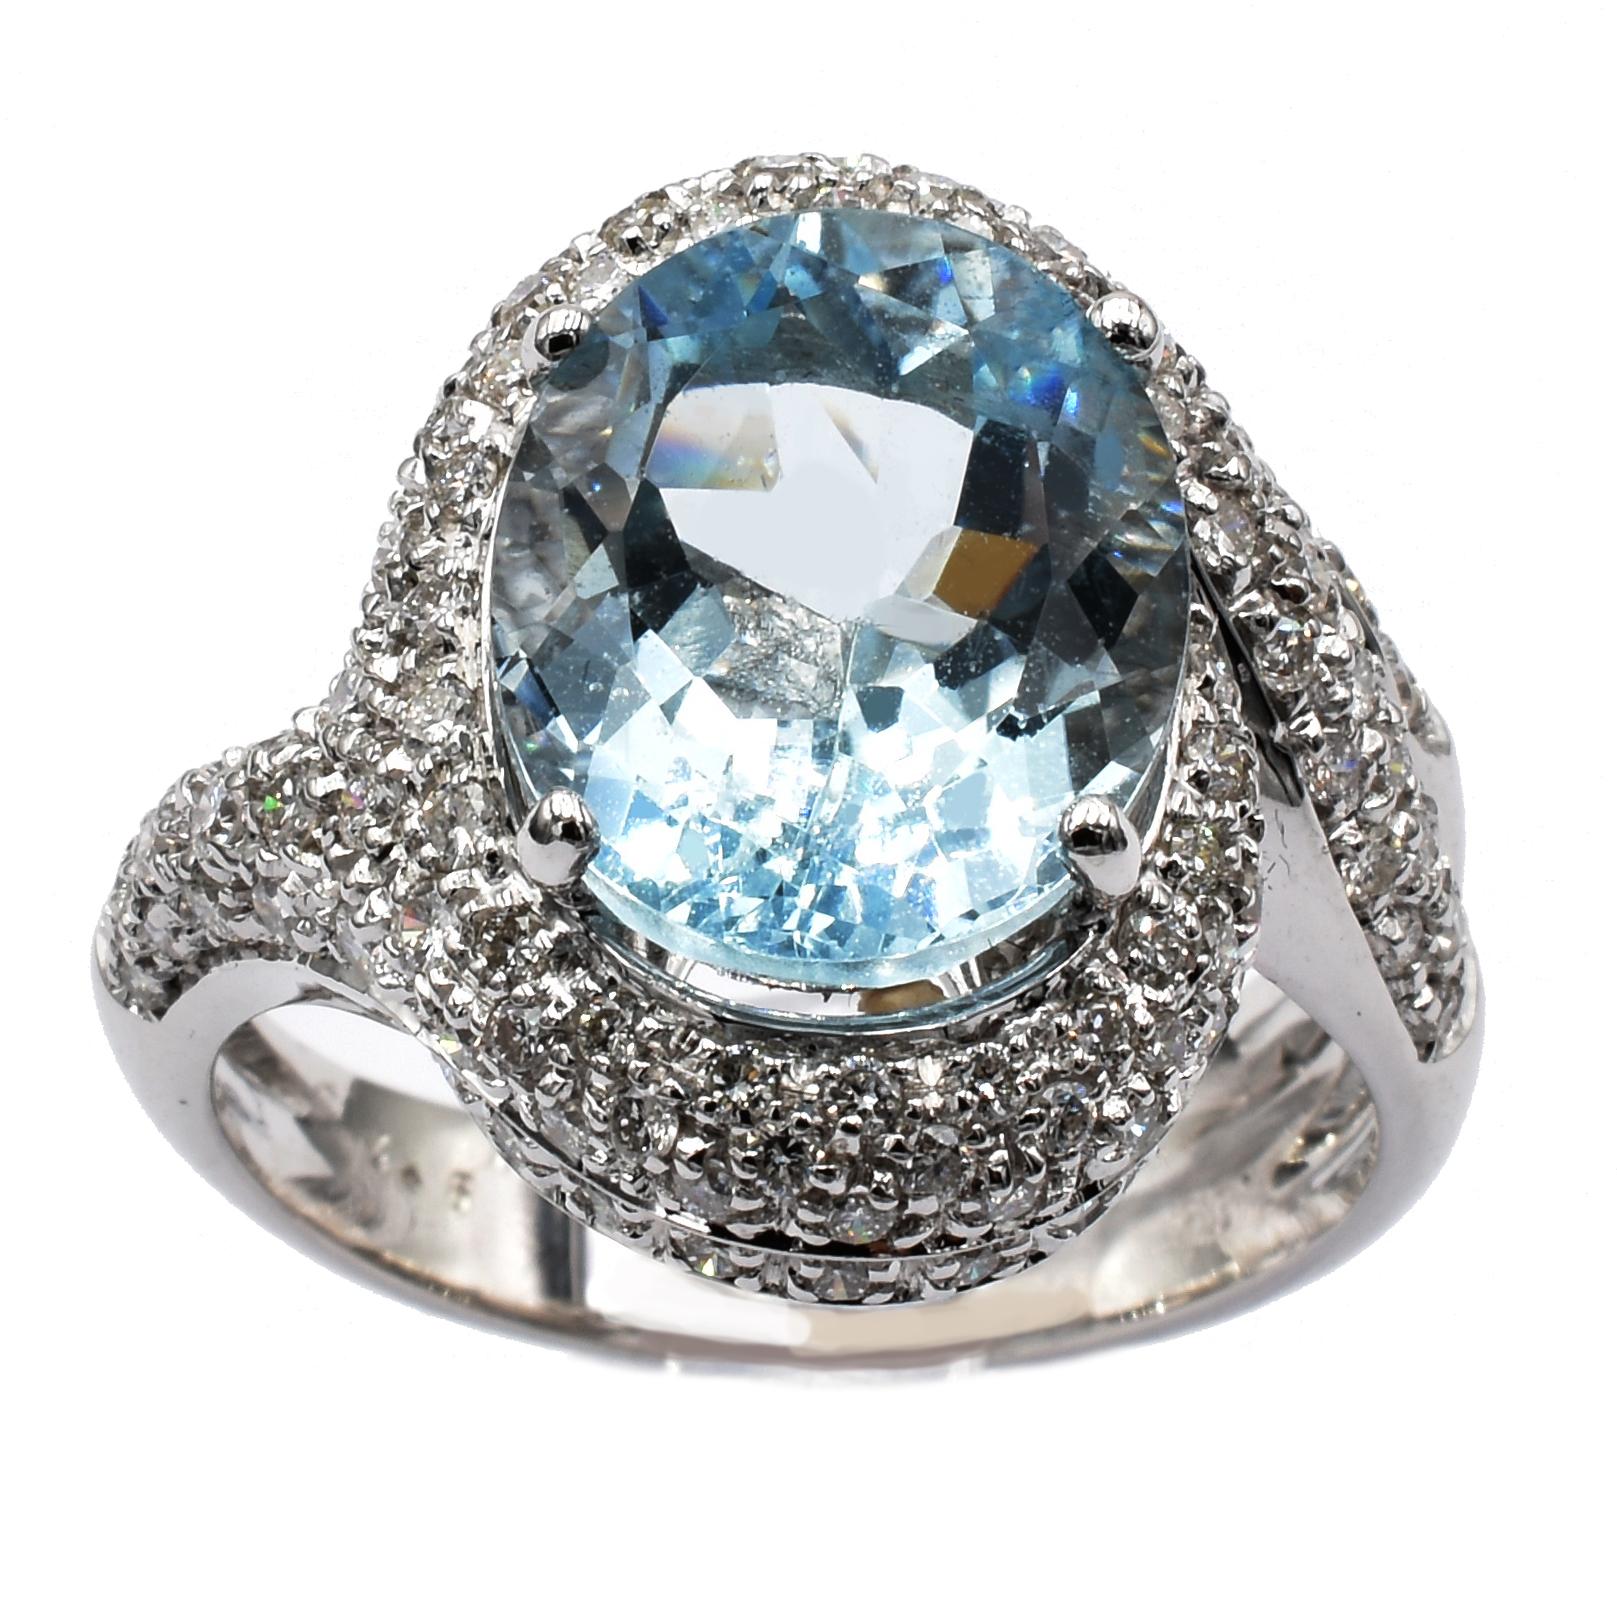 Gilberto Cassola Oval Shaped Aquamarine and Diamonds Gold Ring Made in Italy For Sale 4